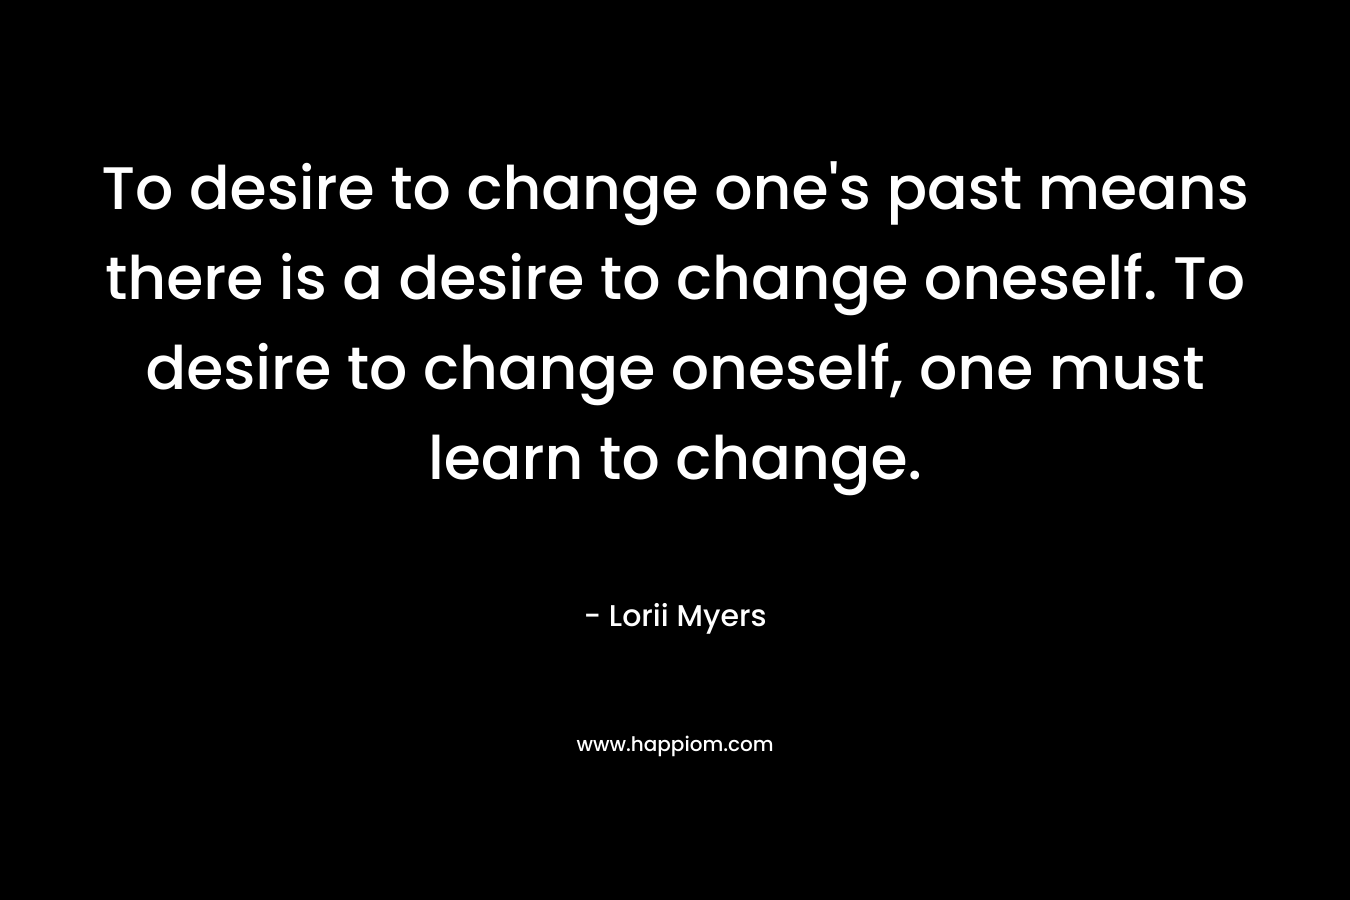 To desire to change one's past means there is a desire to change oneself. To desire to change oneself, one must learn to change.